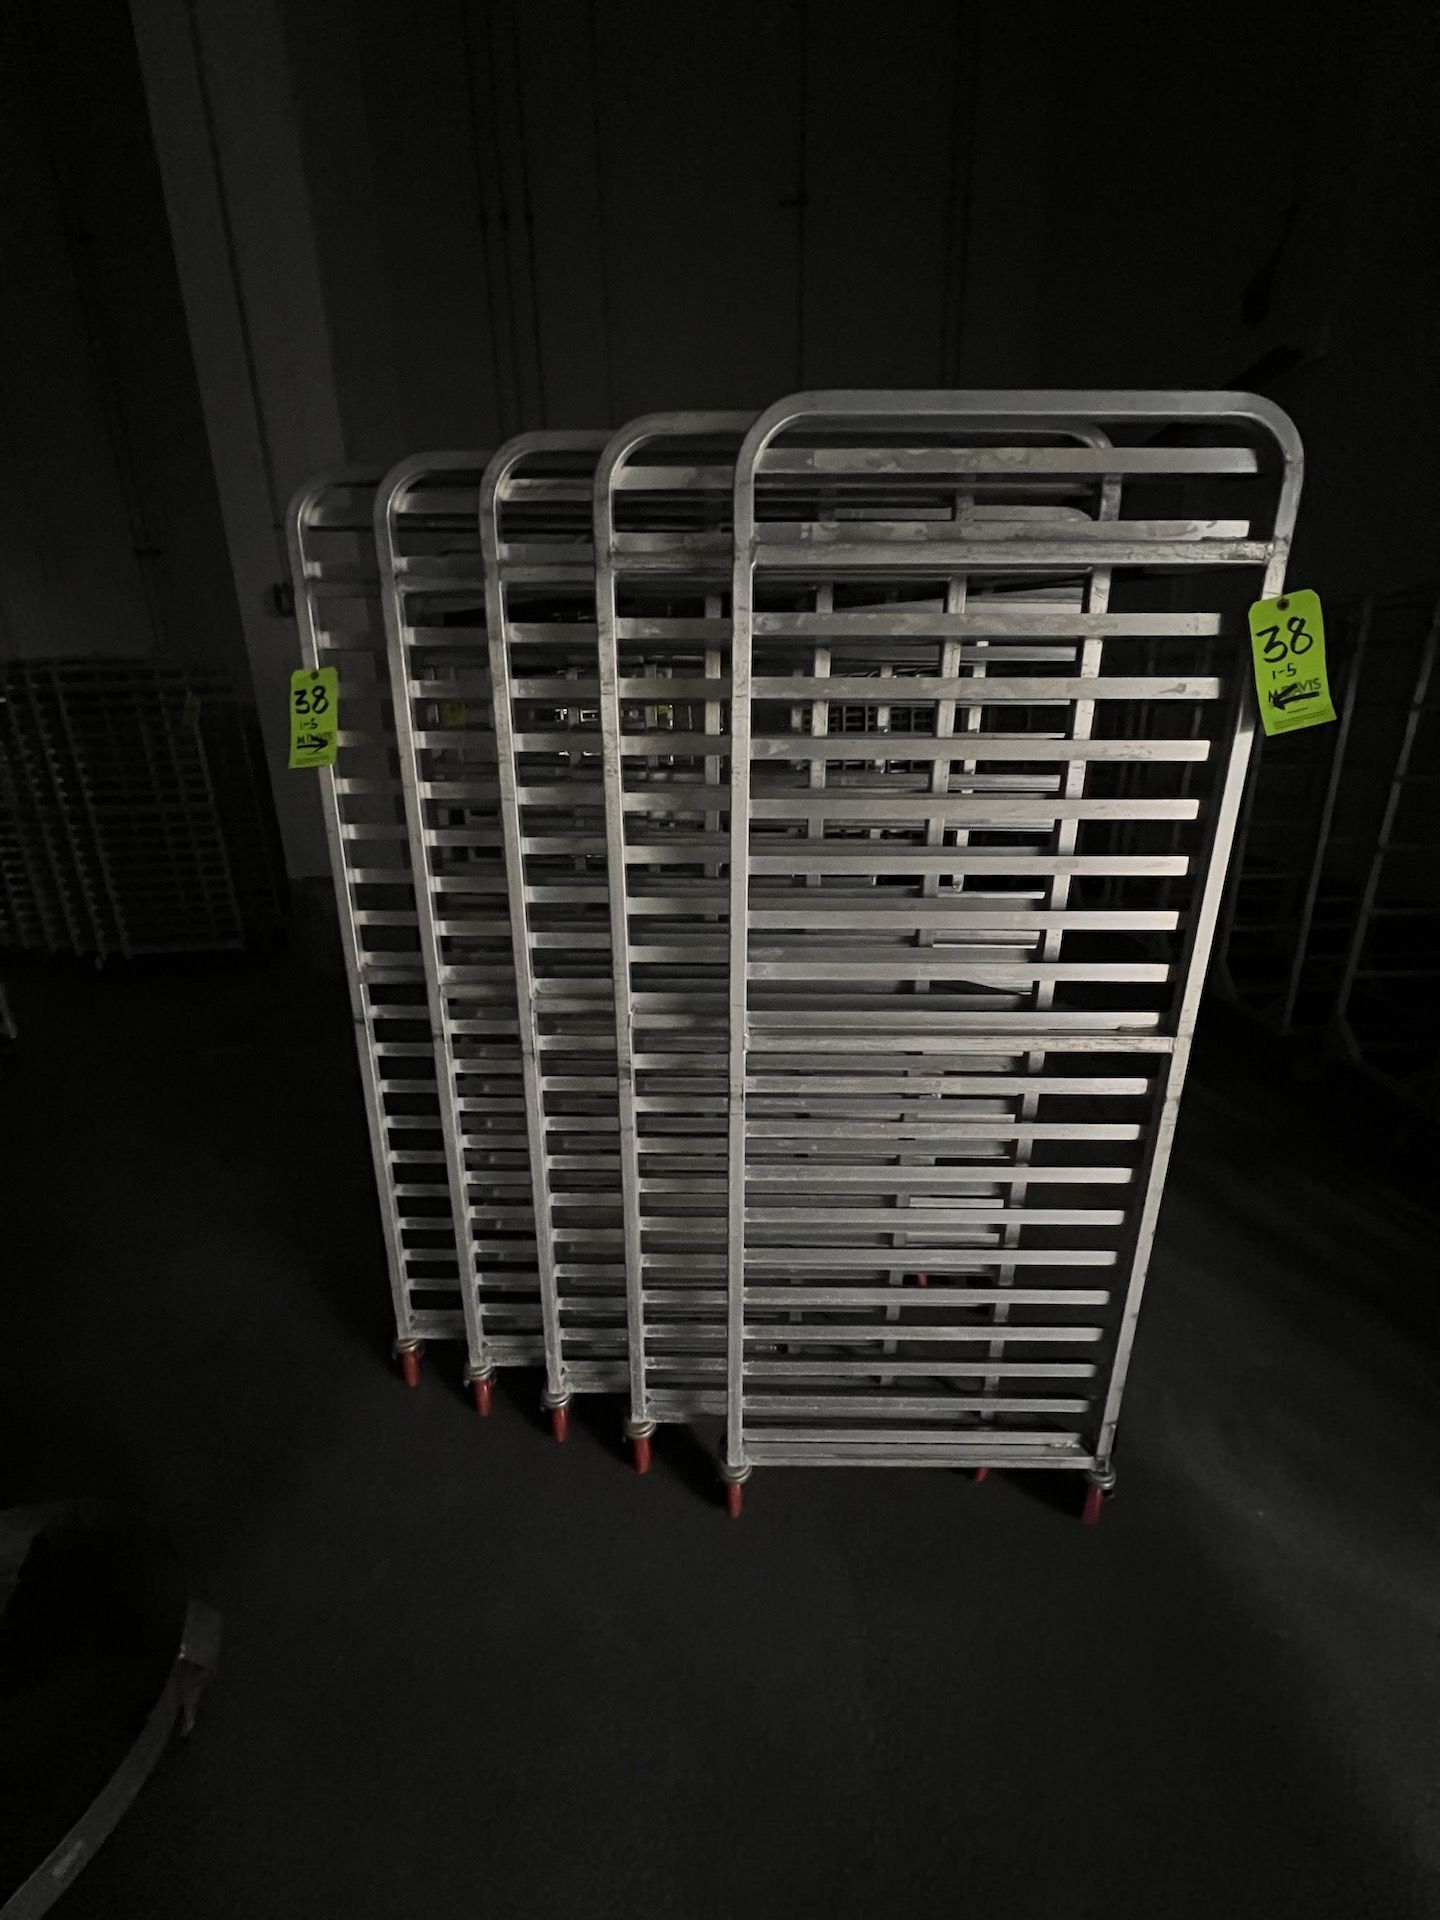 (5) NESTING BUN / SHEET PAN RACKS (RIGGING & SIMPLE LOADING FEE $50.00) (NOTE: DOES NOT INCLUDE